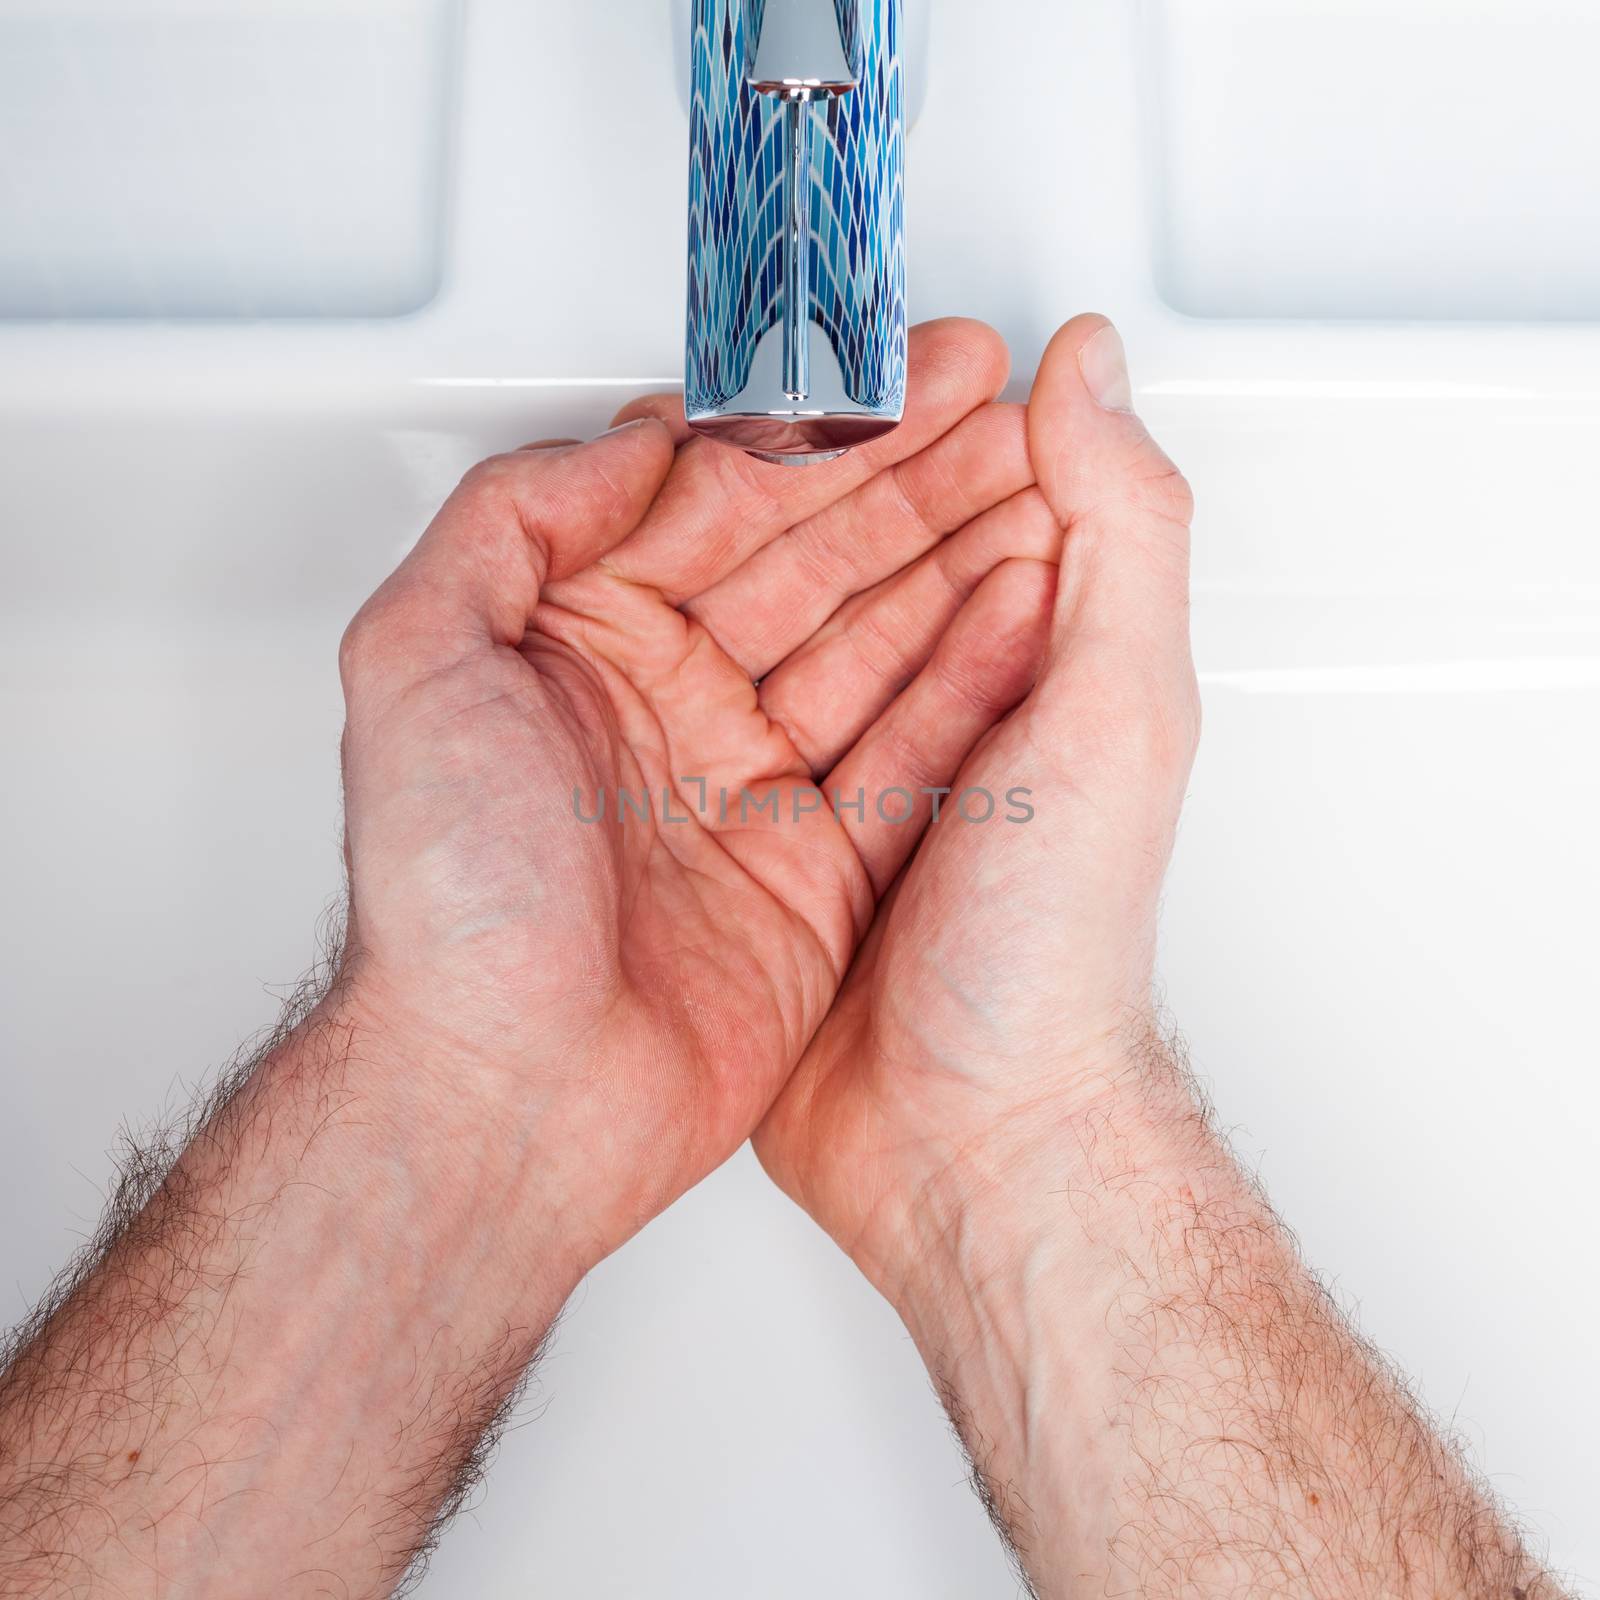 Man waiting to get water from bathroom sink